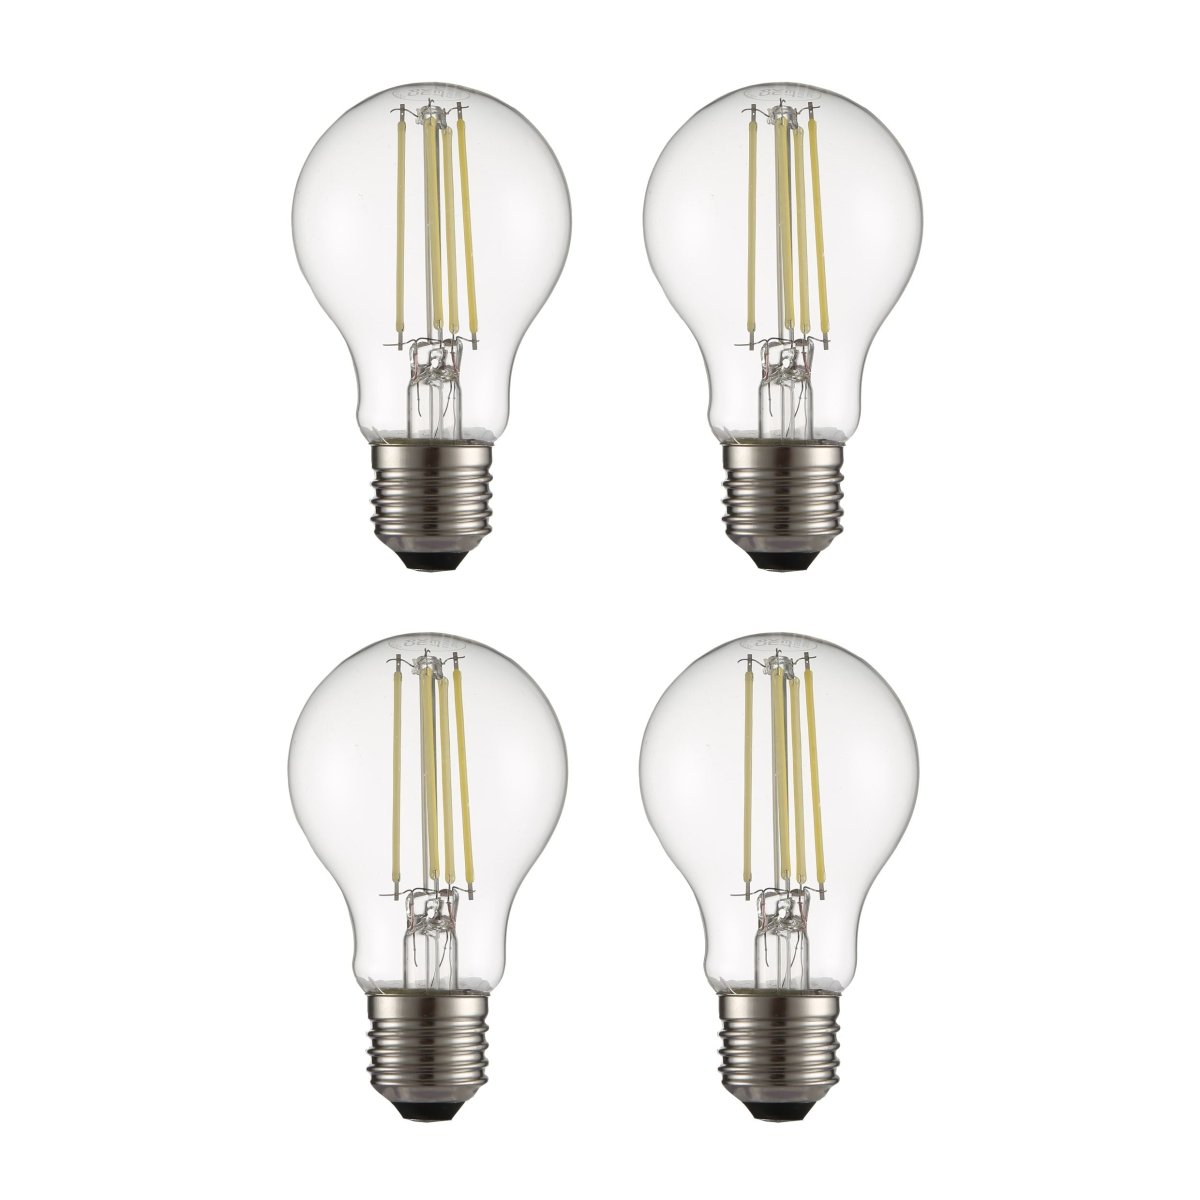 Main image of LED Filament Bulb A60 GLS E27 Edison Screw 6.5W 806lm Cool White 4000K Clear Pack of 4 | TEKLED 583-150091